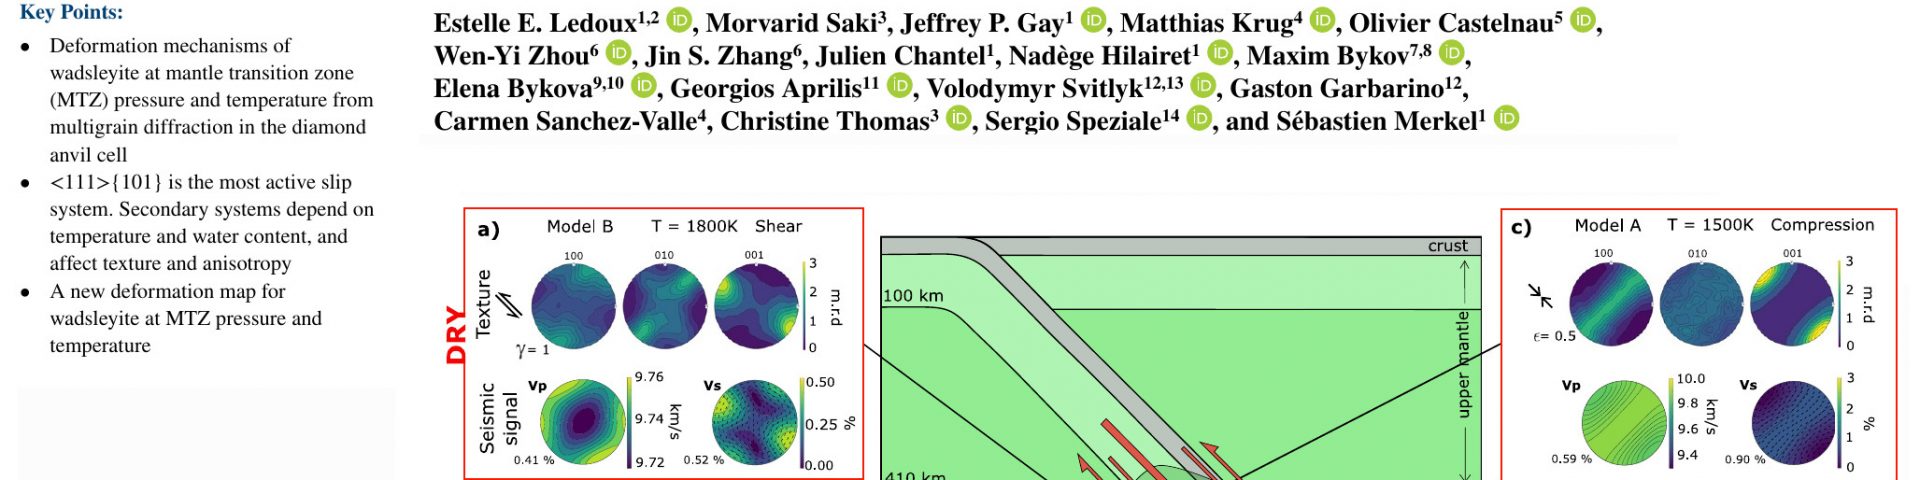 Deformation Mechanisms, Microstructures, and Seismic Anisotropy of Wadsleyite in the Earth’s Transition Zone